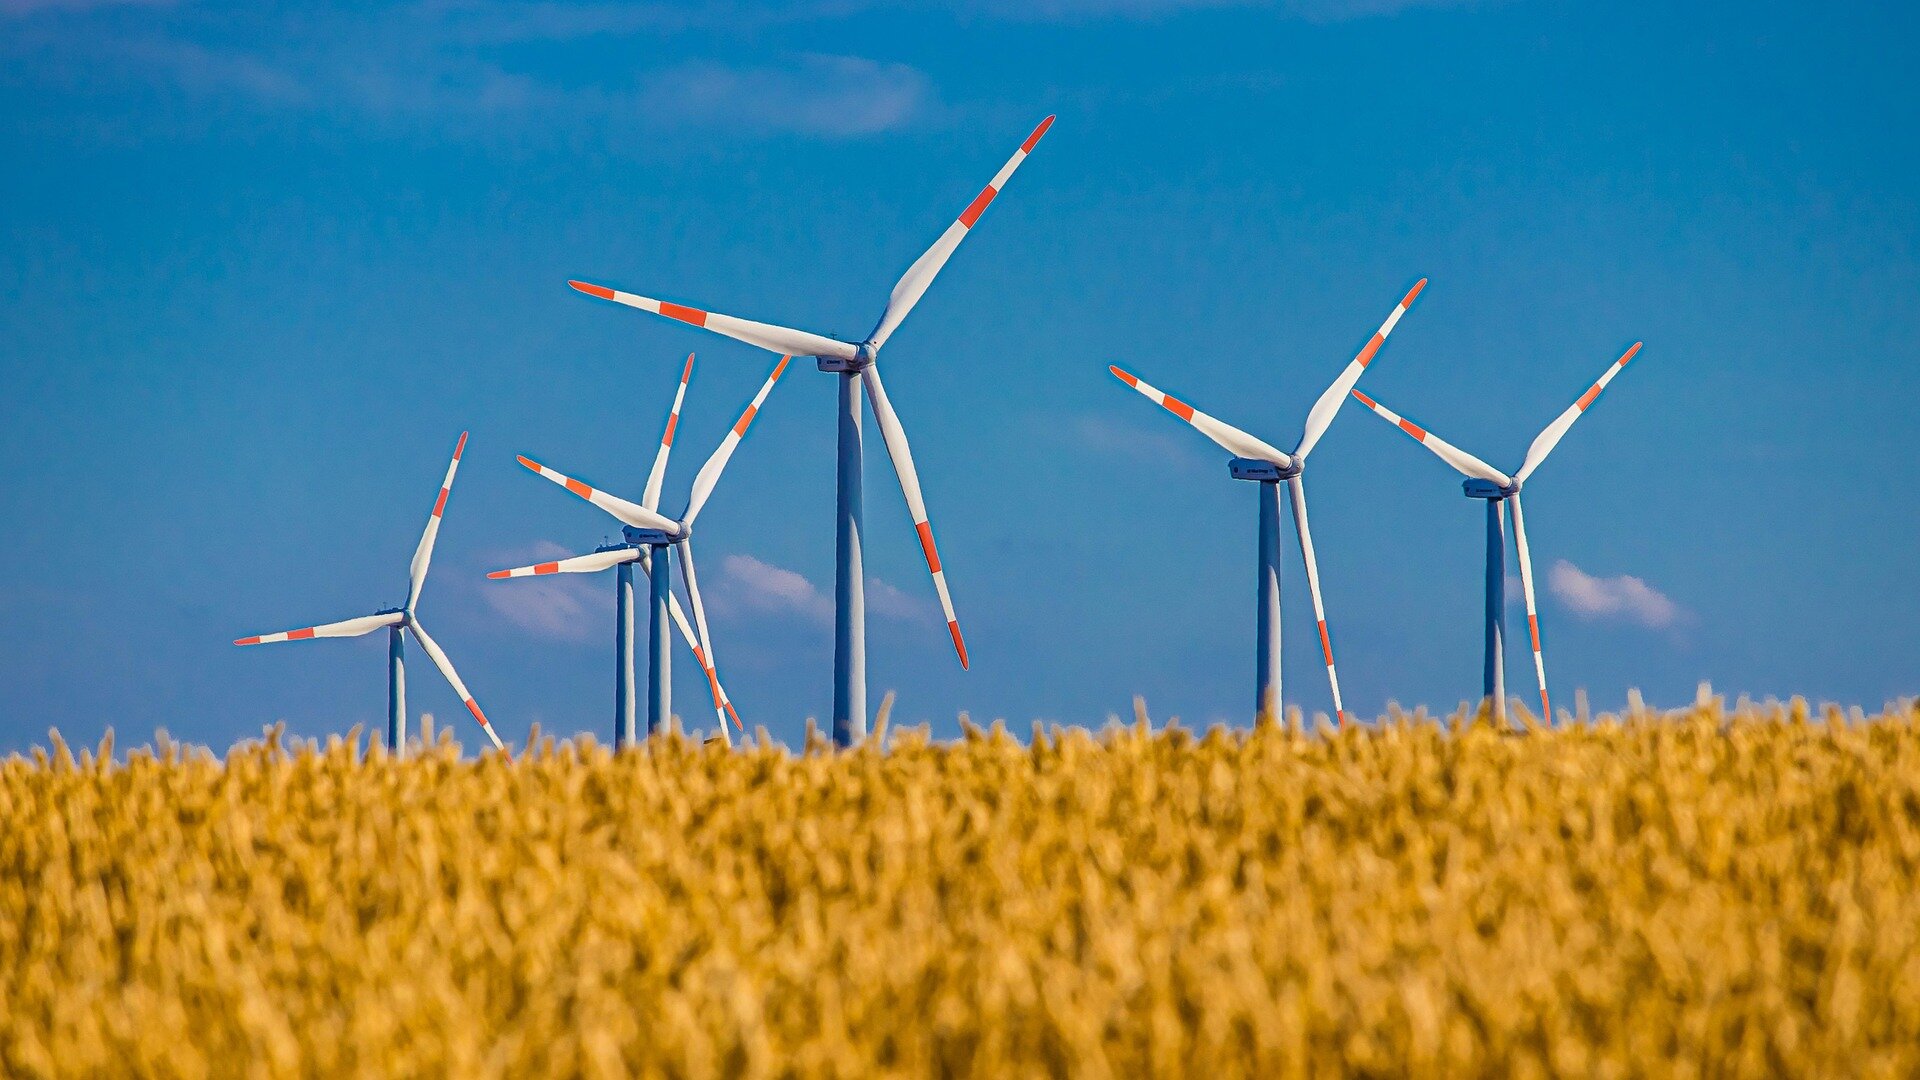 Wind farms more land productive than previously believed